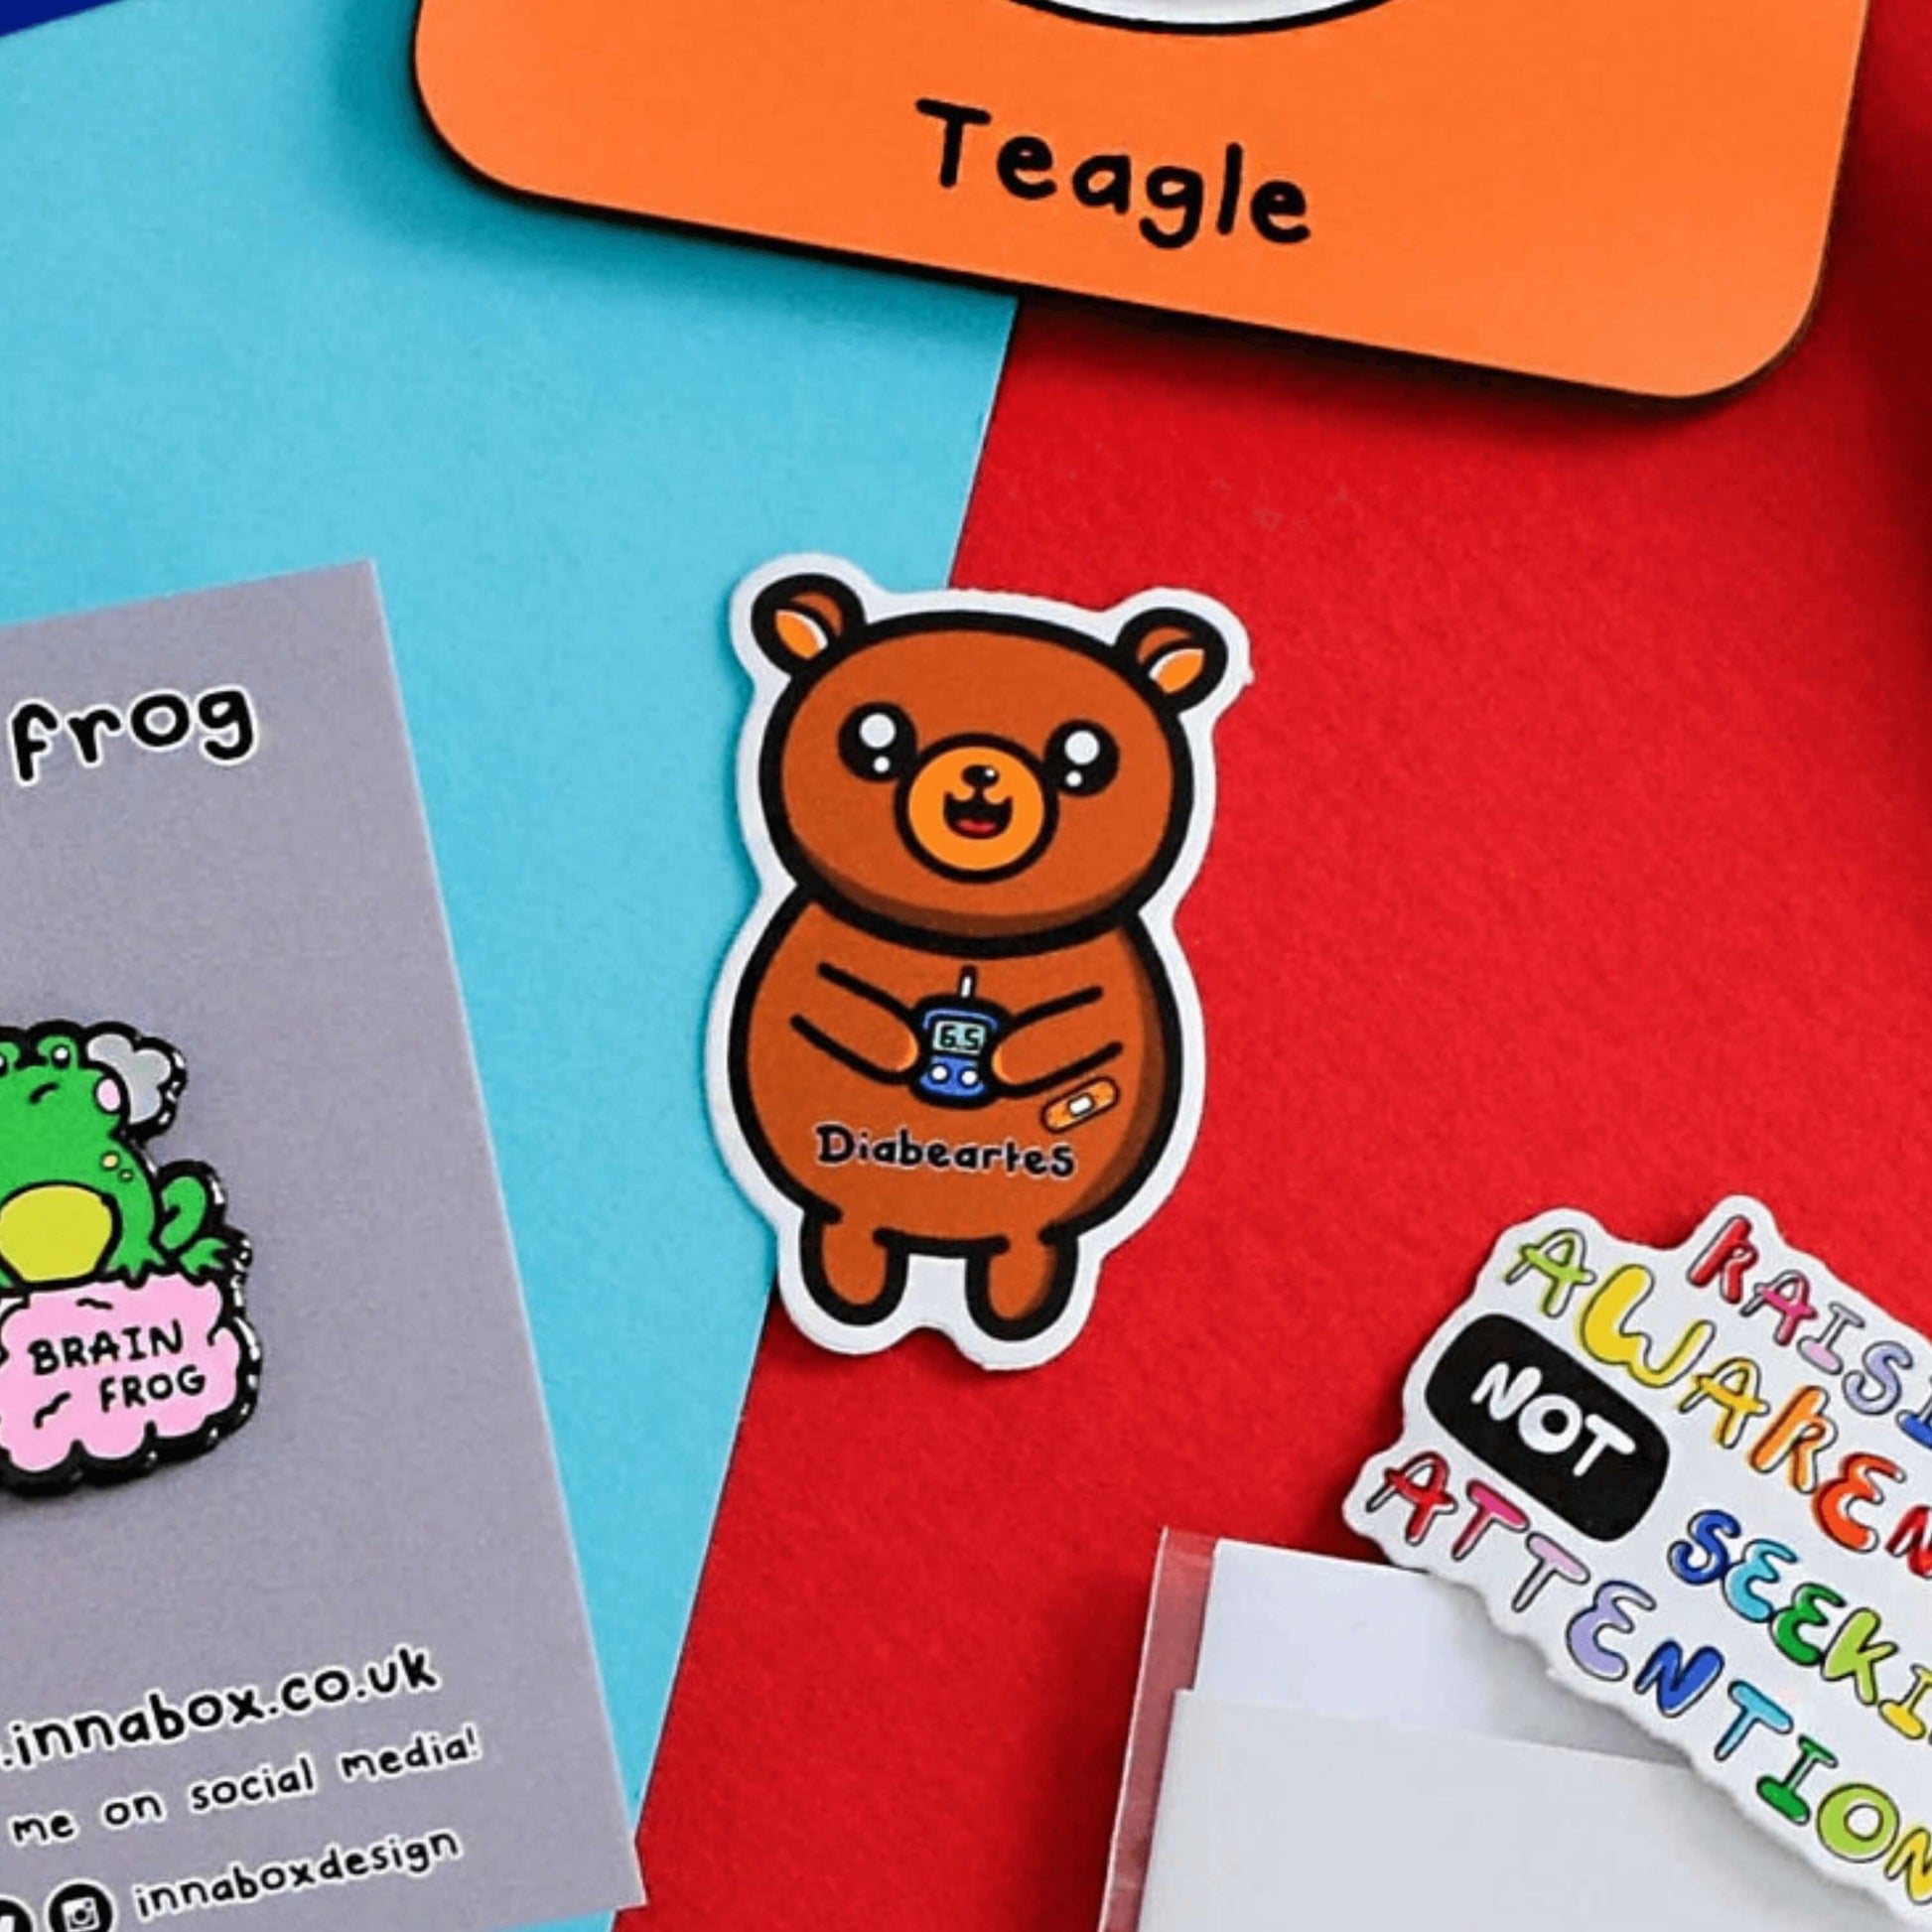 The Diabeartes Sticker - Diabetes on a red and blue background with other innabox products. The brown bear shaped sticker is smiling holding a blood glucose reader with a plaster on its arm, across its tummy reads 'diabeartes' in black. The design is raising awareness for those with type 1 diabetes and type 2 diabetes.